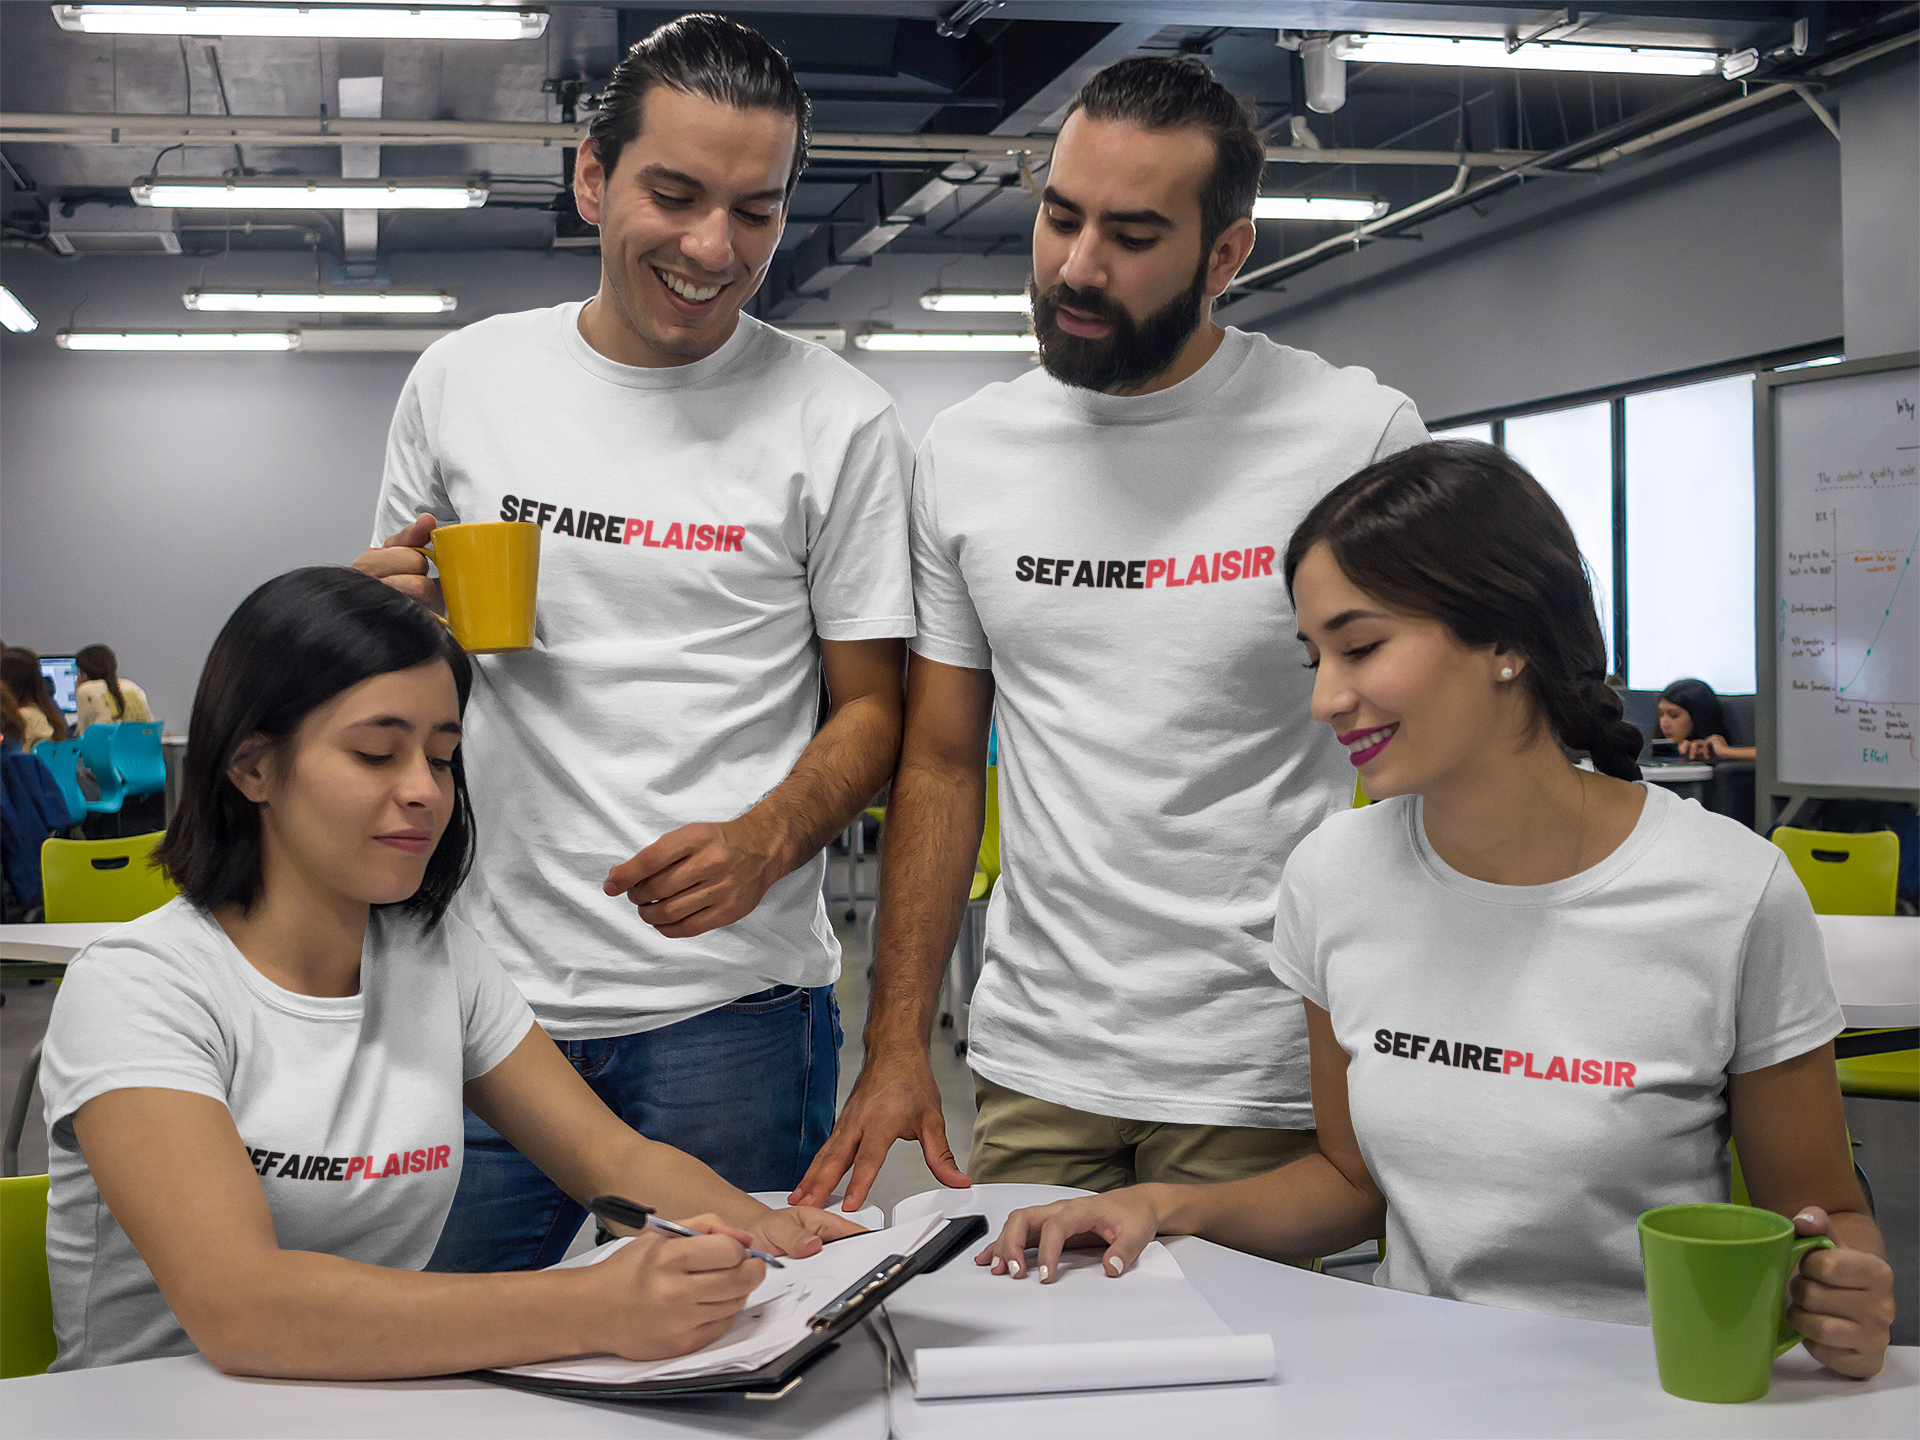 group of four coworkers talking while wearing different tshirts mockup a15650